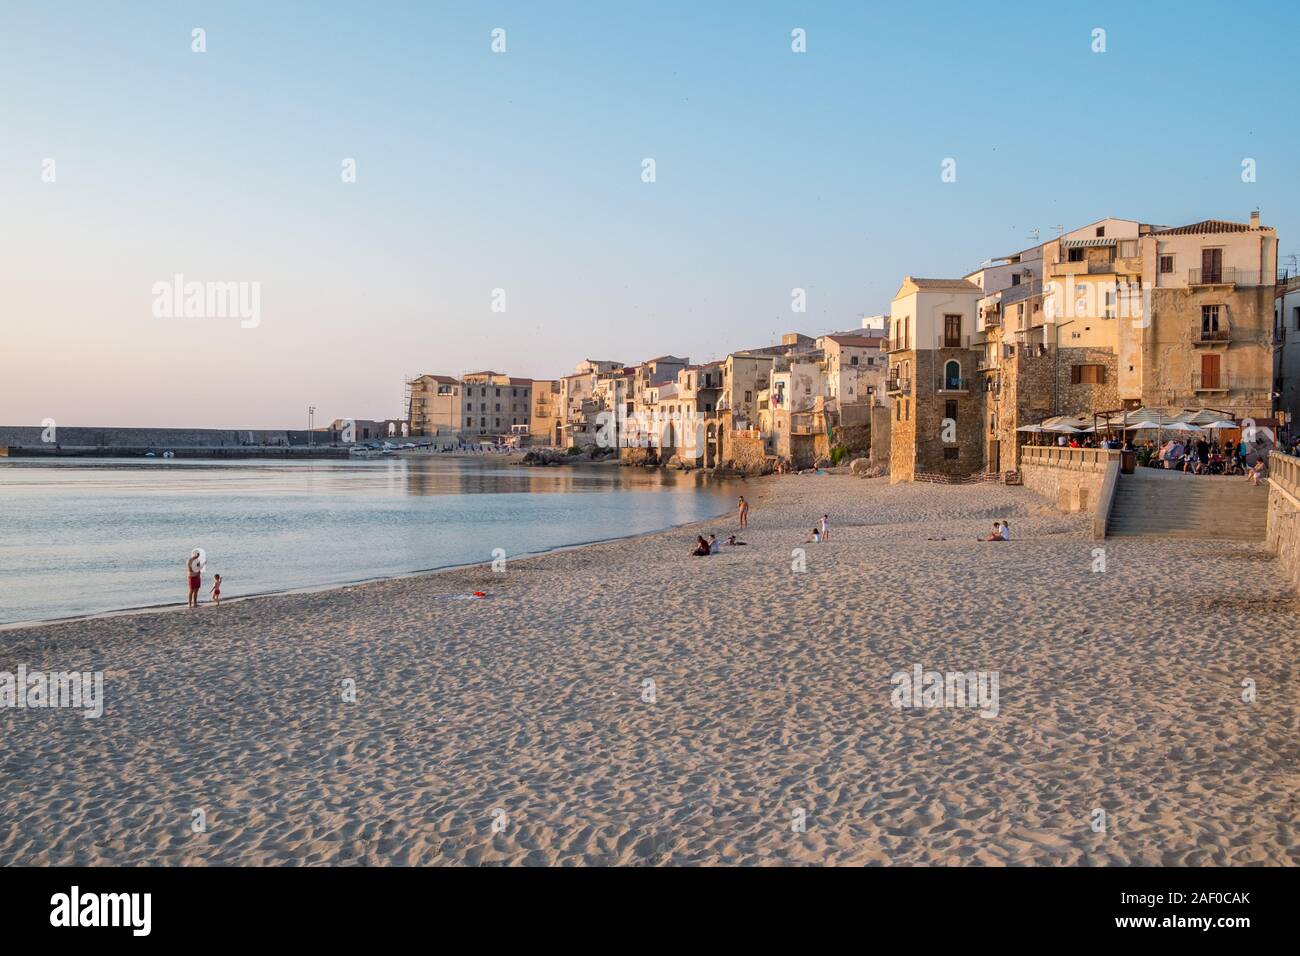 The beachfront and the Old Town in Cefalù, Sicily. Historic Cefalù is a major tourist destination on Sicily. Stock Photo